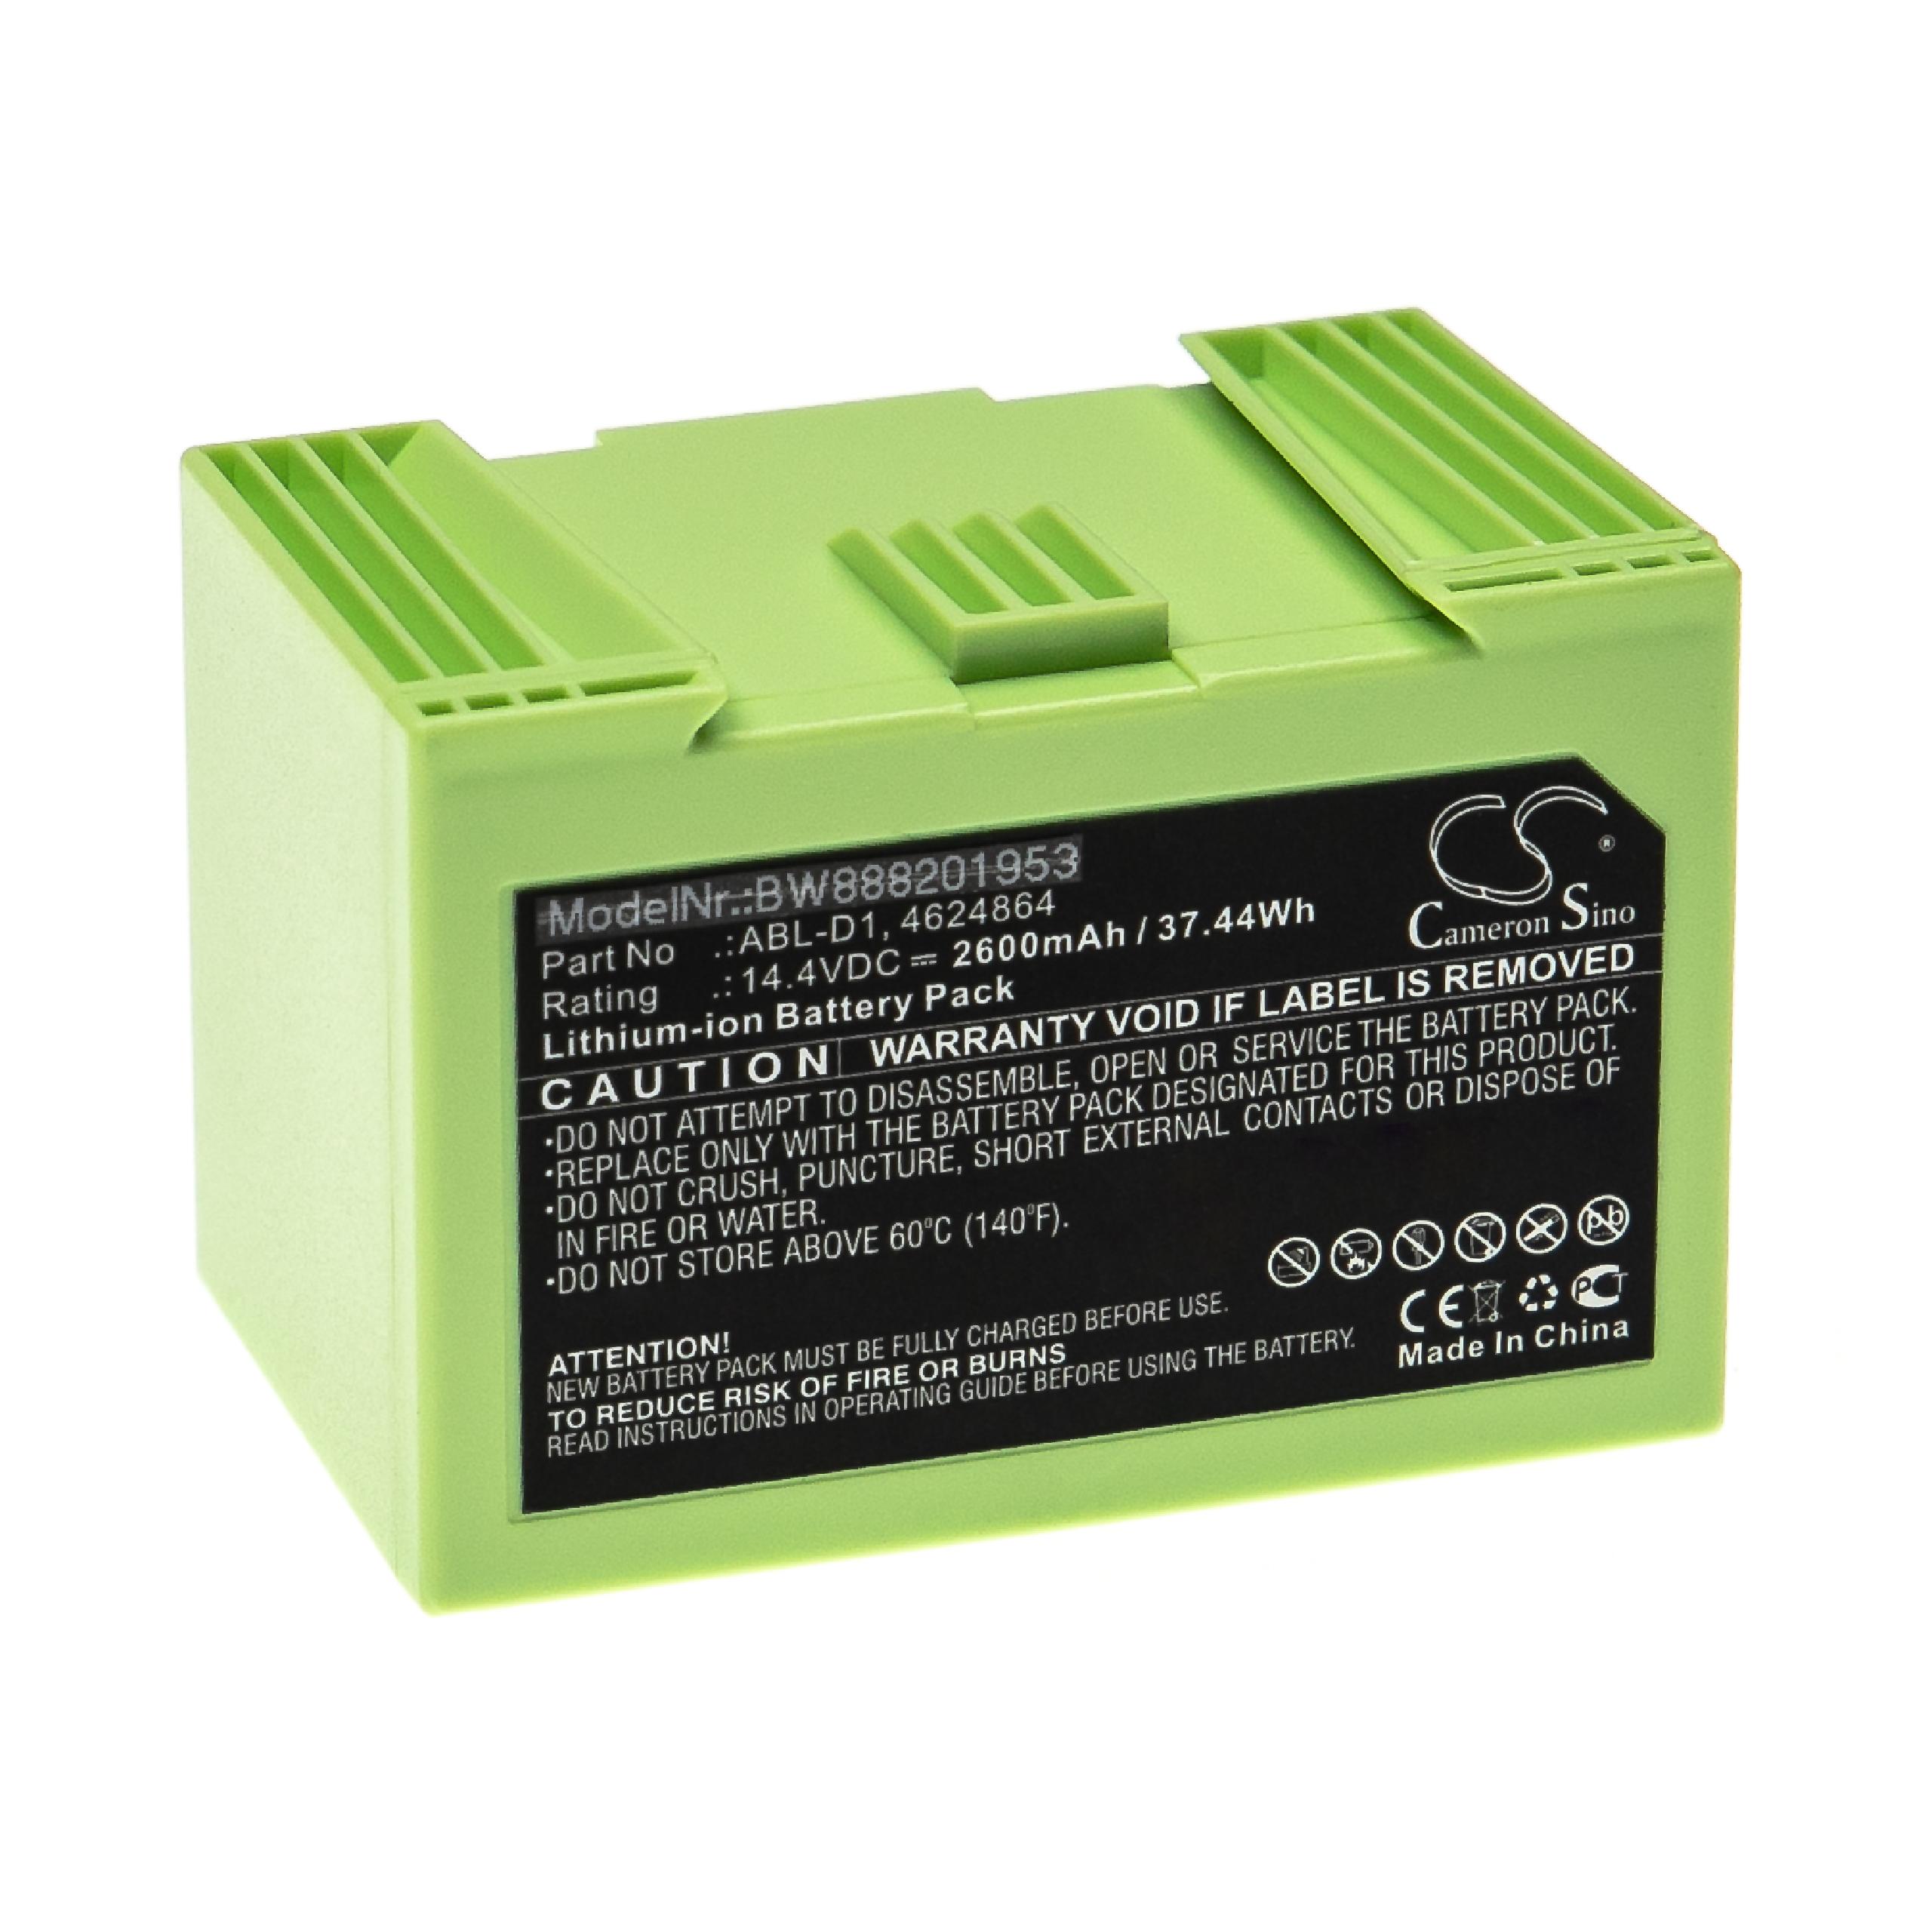 Battery Replacement for iRobot ABL-D2, ABL-D1, 4624864 for - 2600mAh, 14.4V, Li-Ion